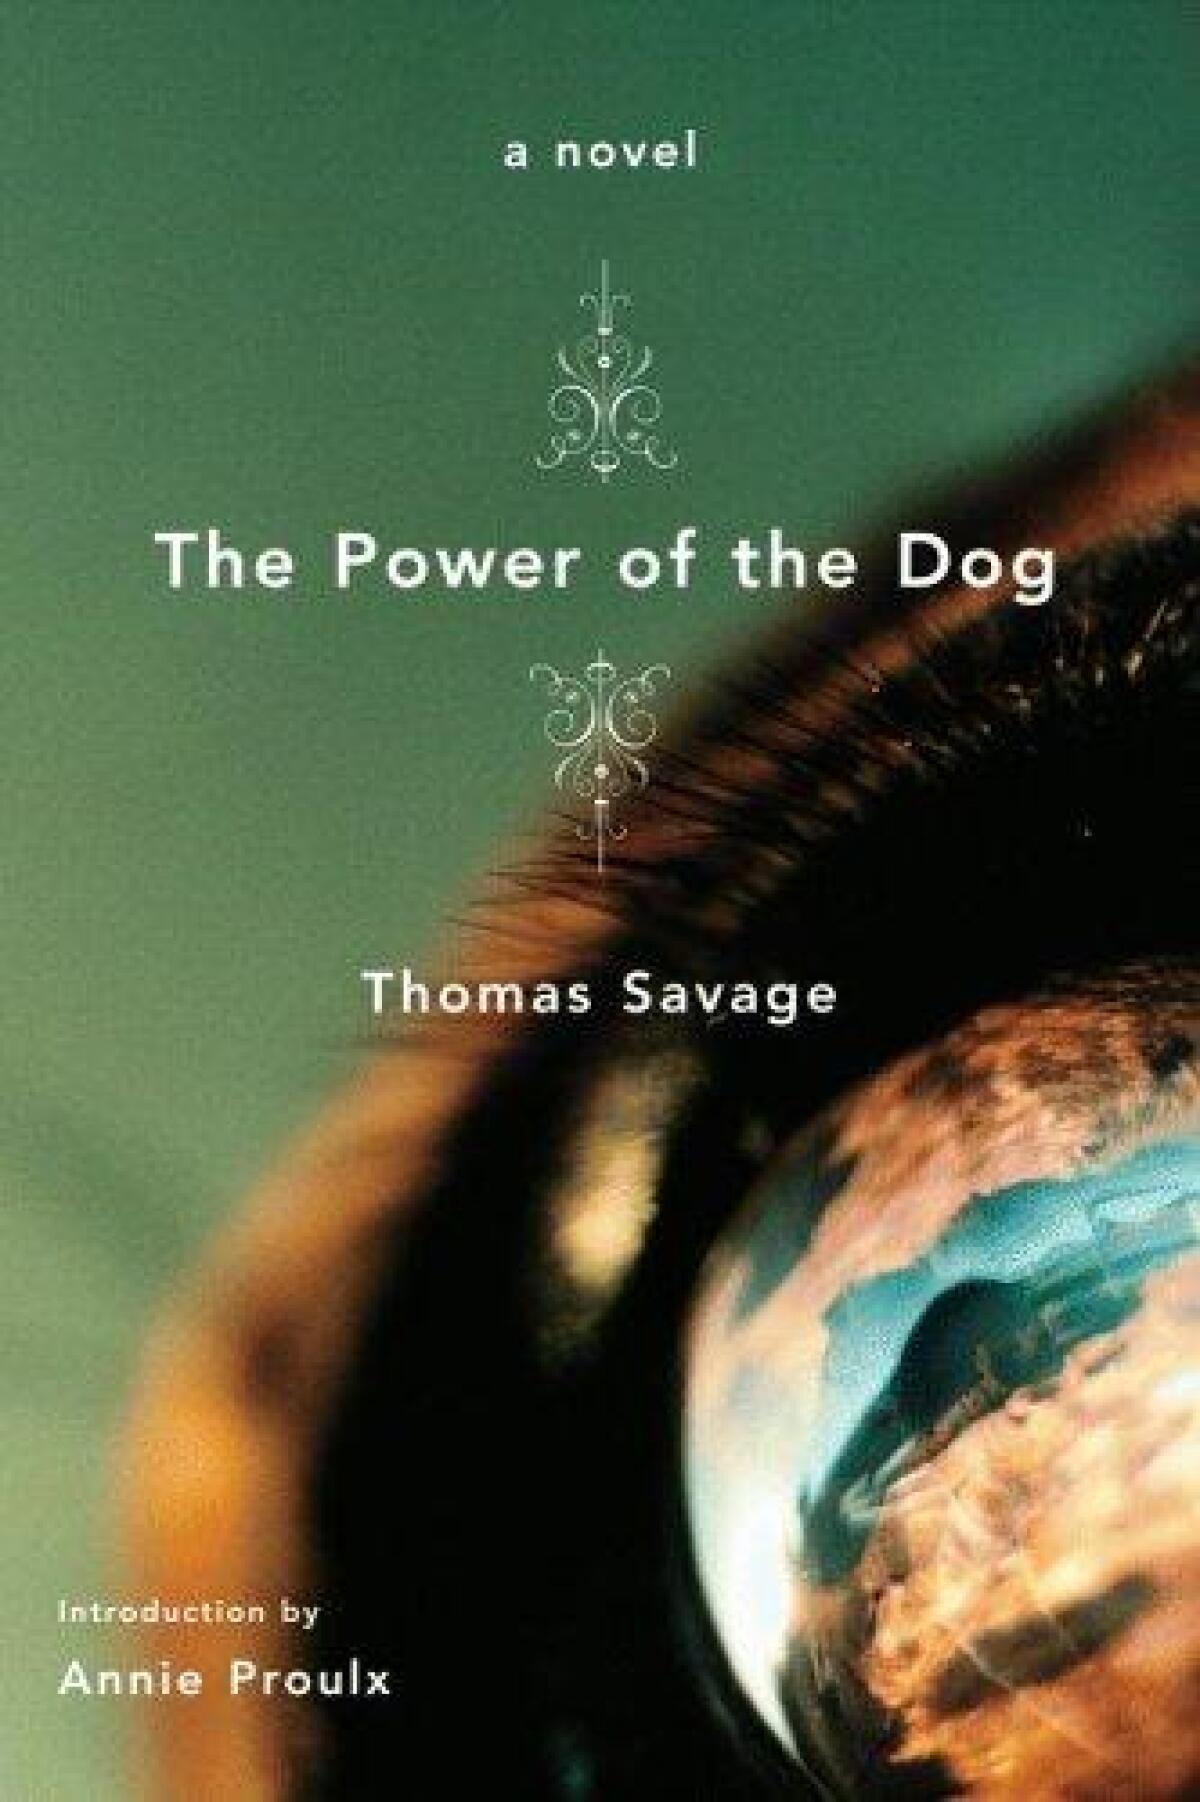 Book jacket for "The Power of the Dog" by author Thomas Savage.